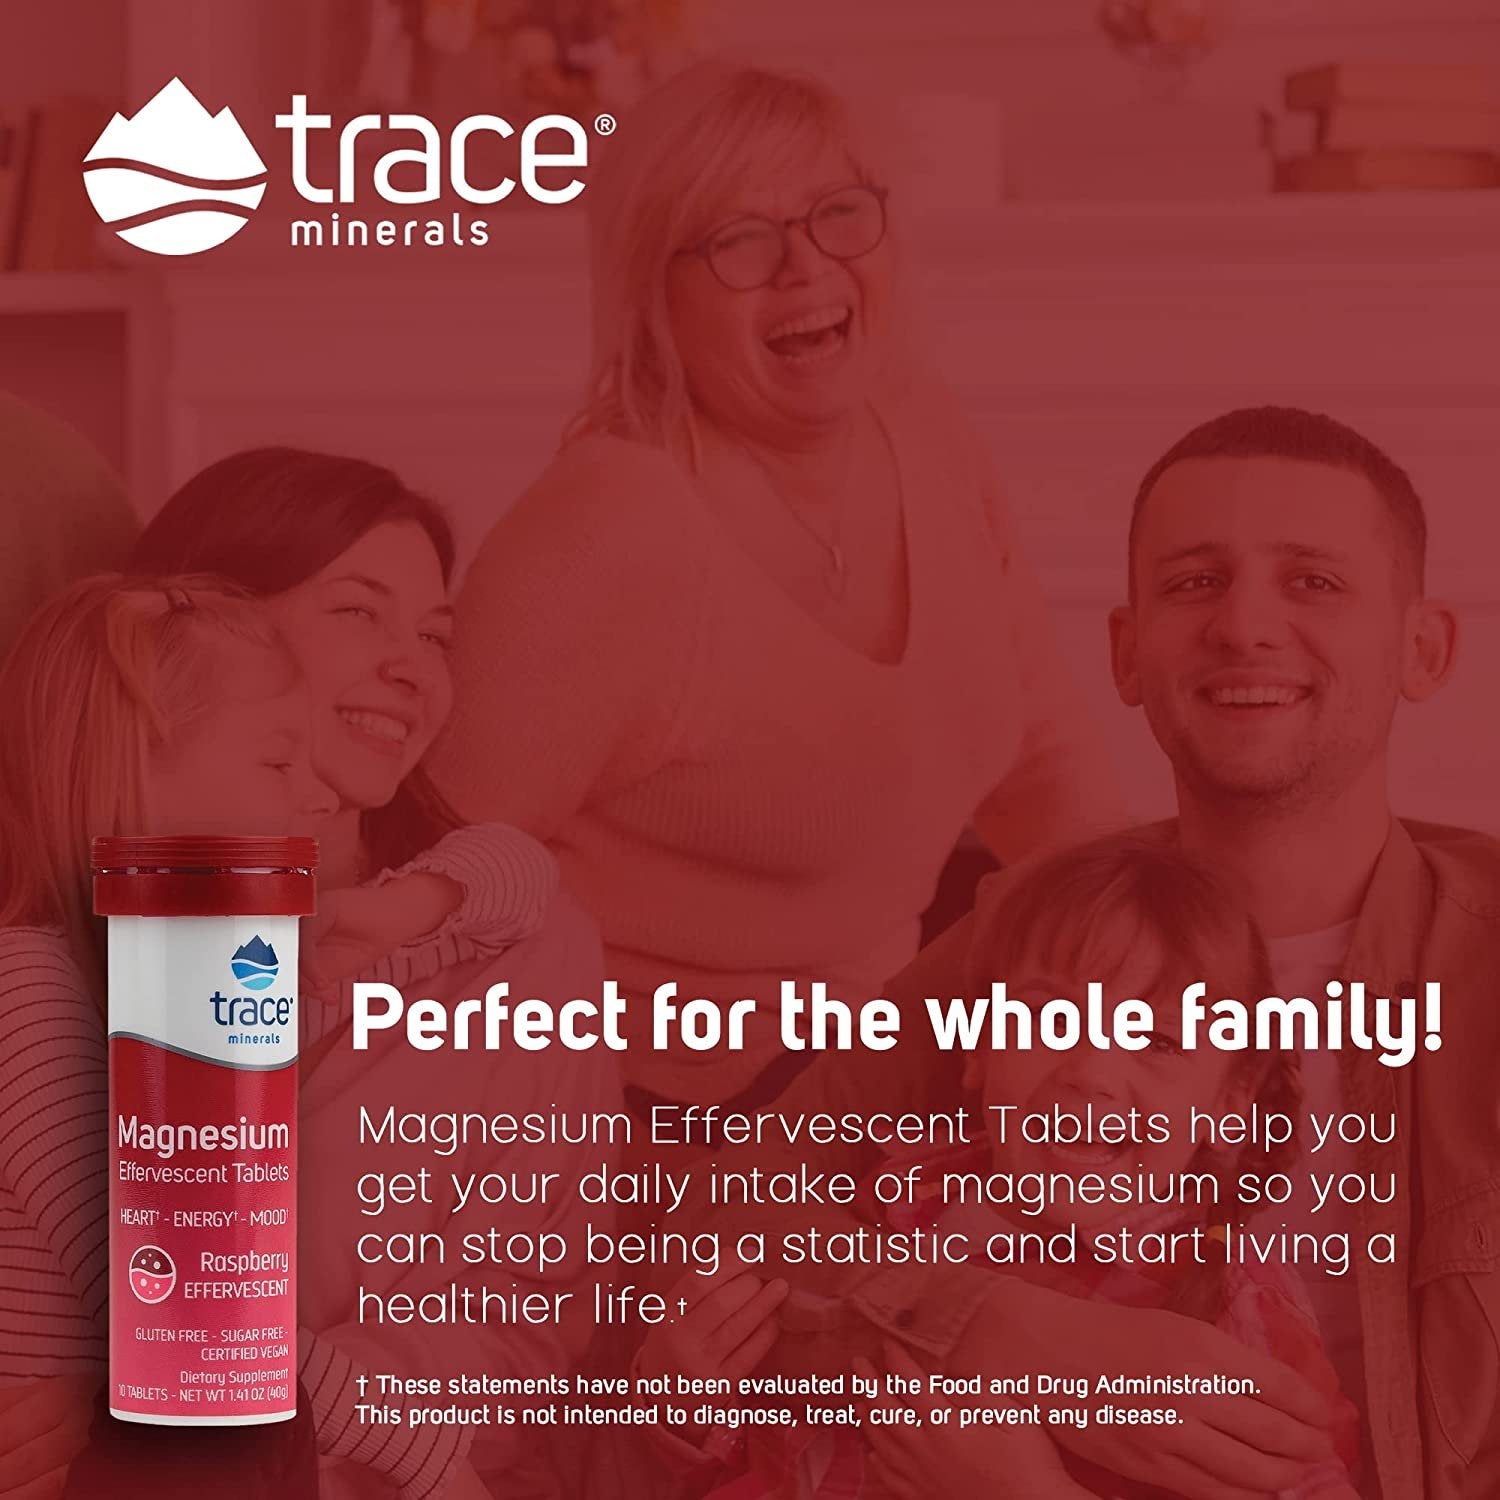 Trace Minerals | Magnesium Effervescent Drink Tablets | Promotes Heart Health, Mood, pH Balance and Energy | Raspberry Flavor | 150mg per serving, 80 Tablets